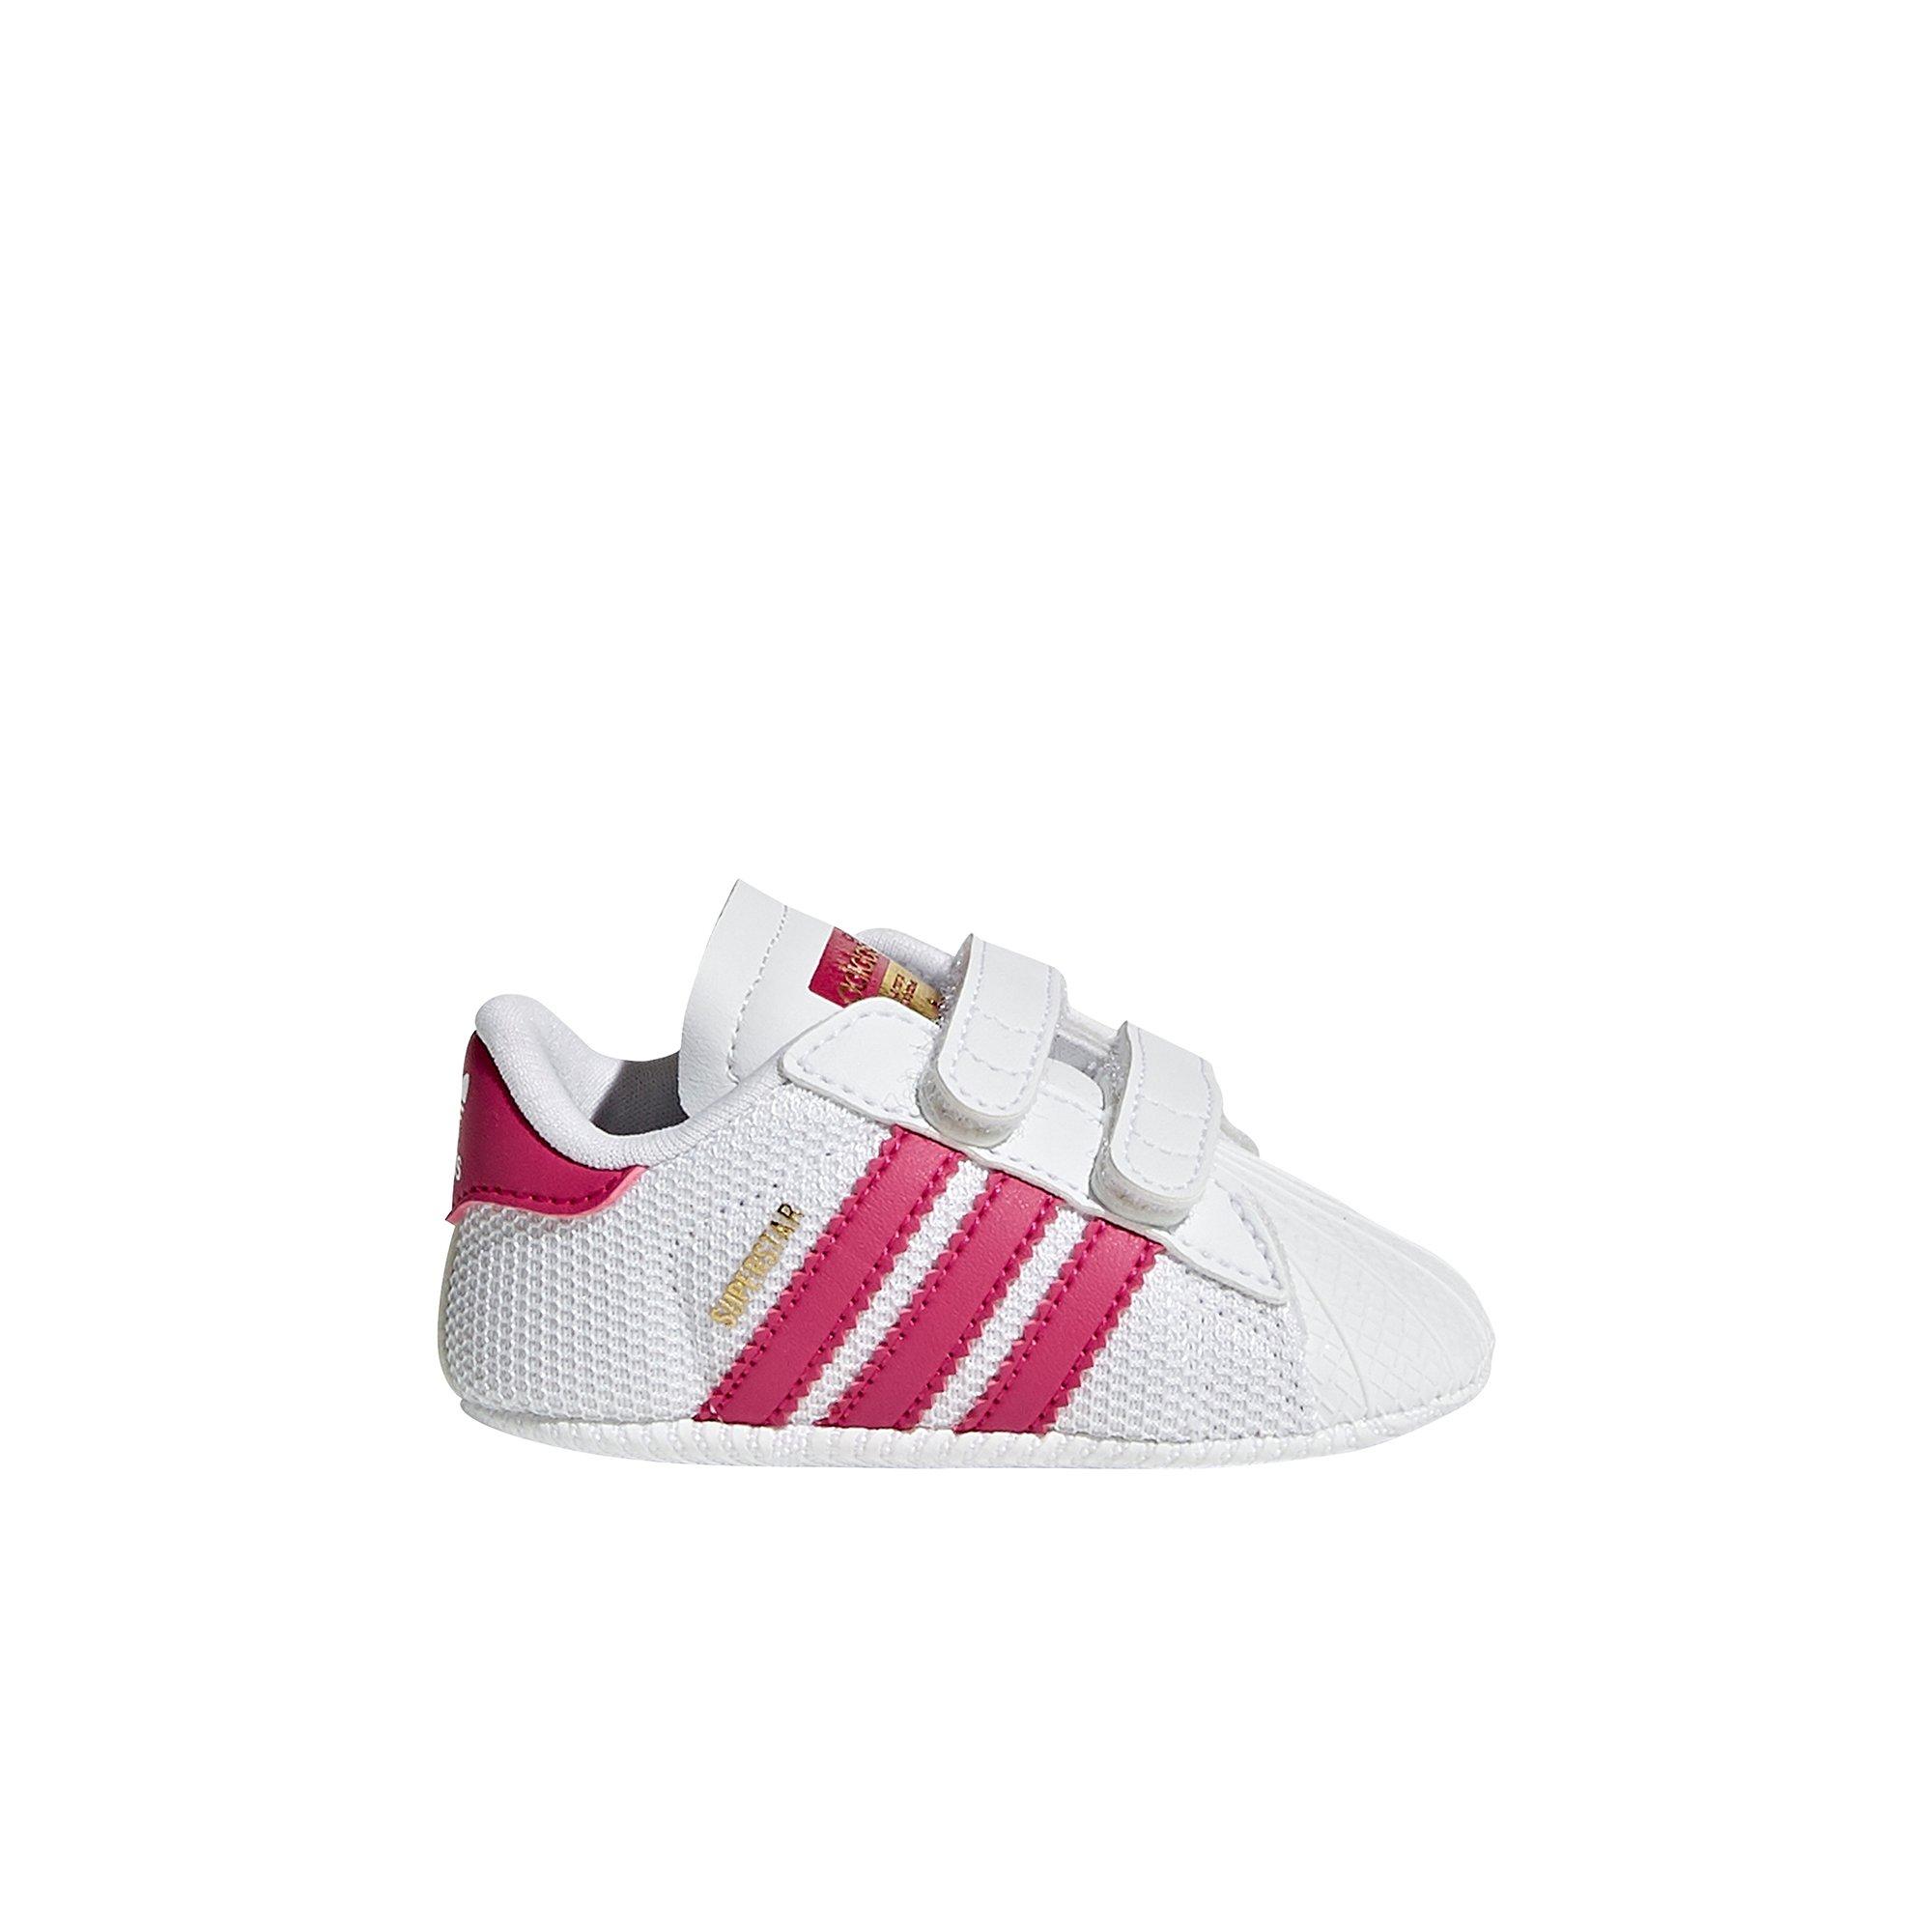 adidas baby shoes pink